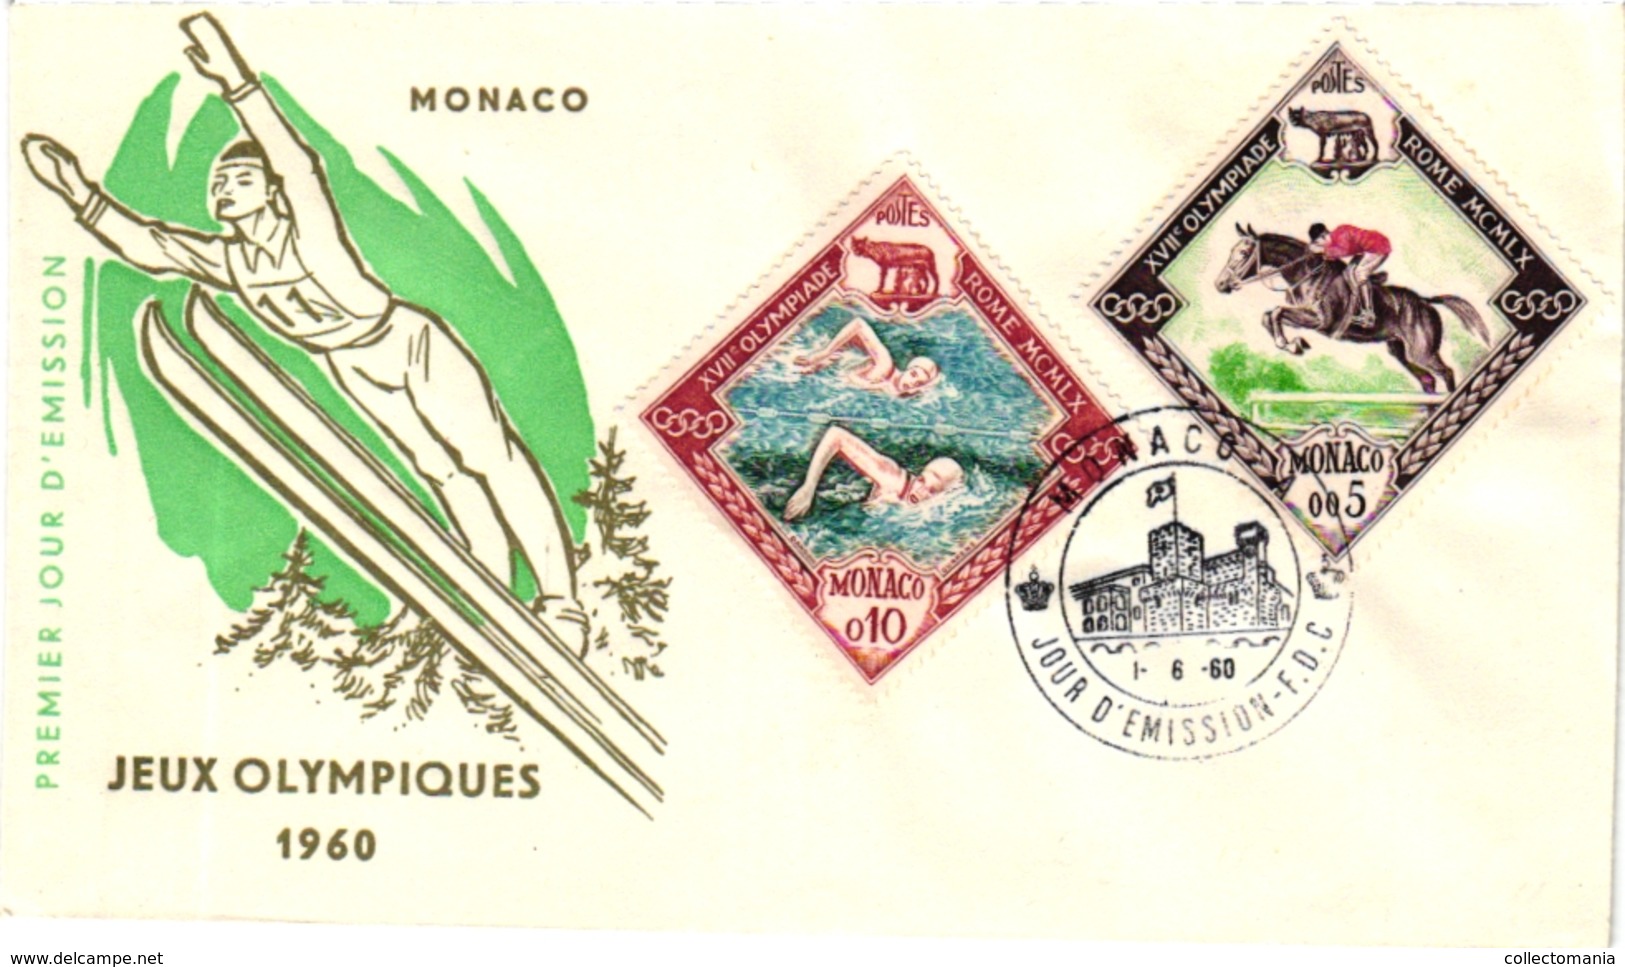 2 First Day Of Issue  Envelope  Jeux Olympiques 1960 MONACO  Premier Jour Emission  Ski - Winter Sports